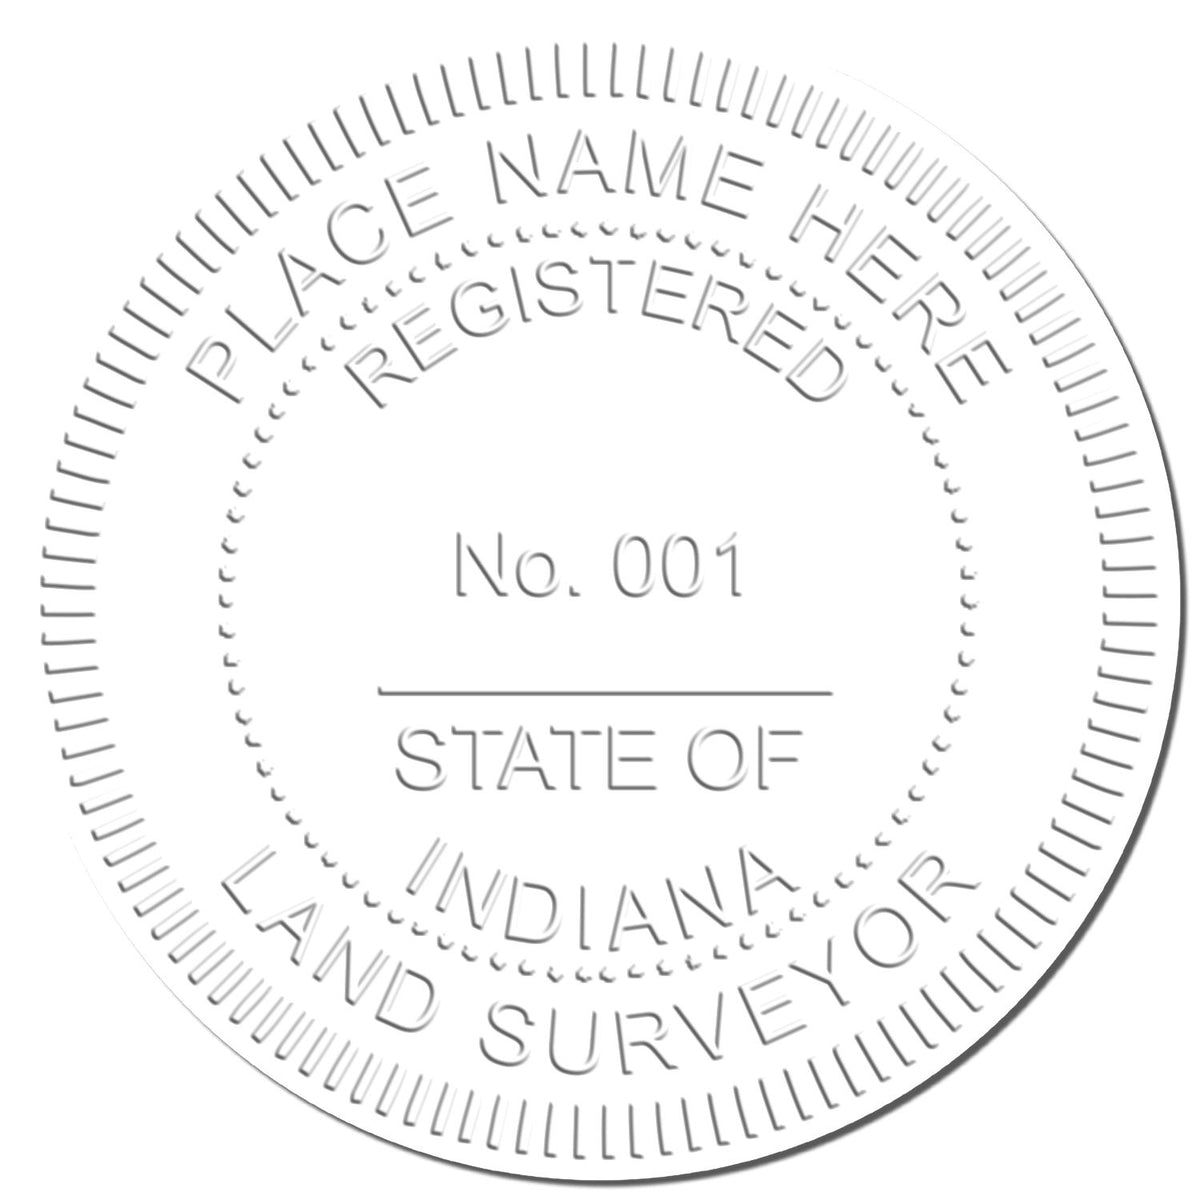 This paper is stamped with a sample imprint of the Hybrid Indiana Land Surveyor Seal, signifying its quality and reliability.